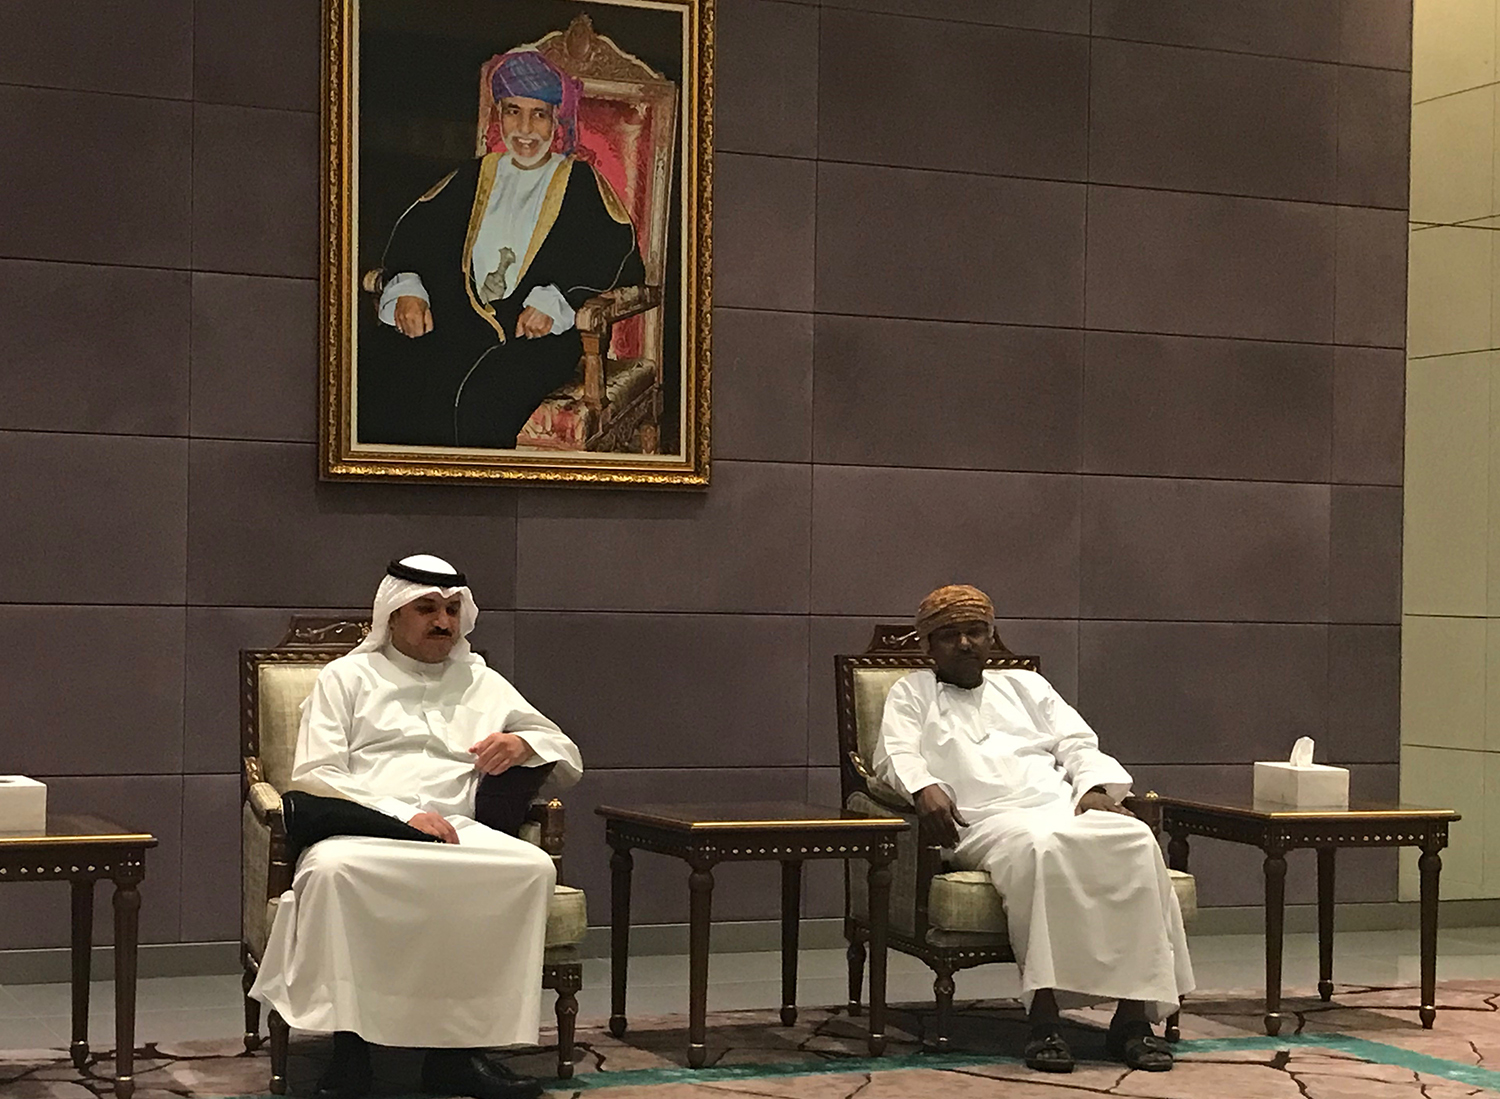 overnor of Central Bank of Kuwait (CBK) Mohammad Al-Hashel arrives in Muscat for GCC meeting